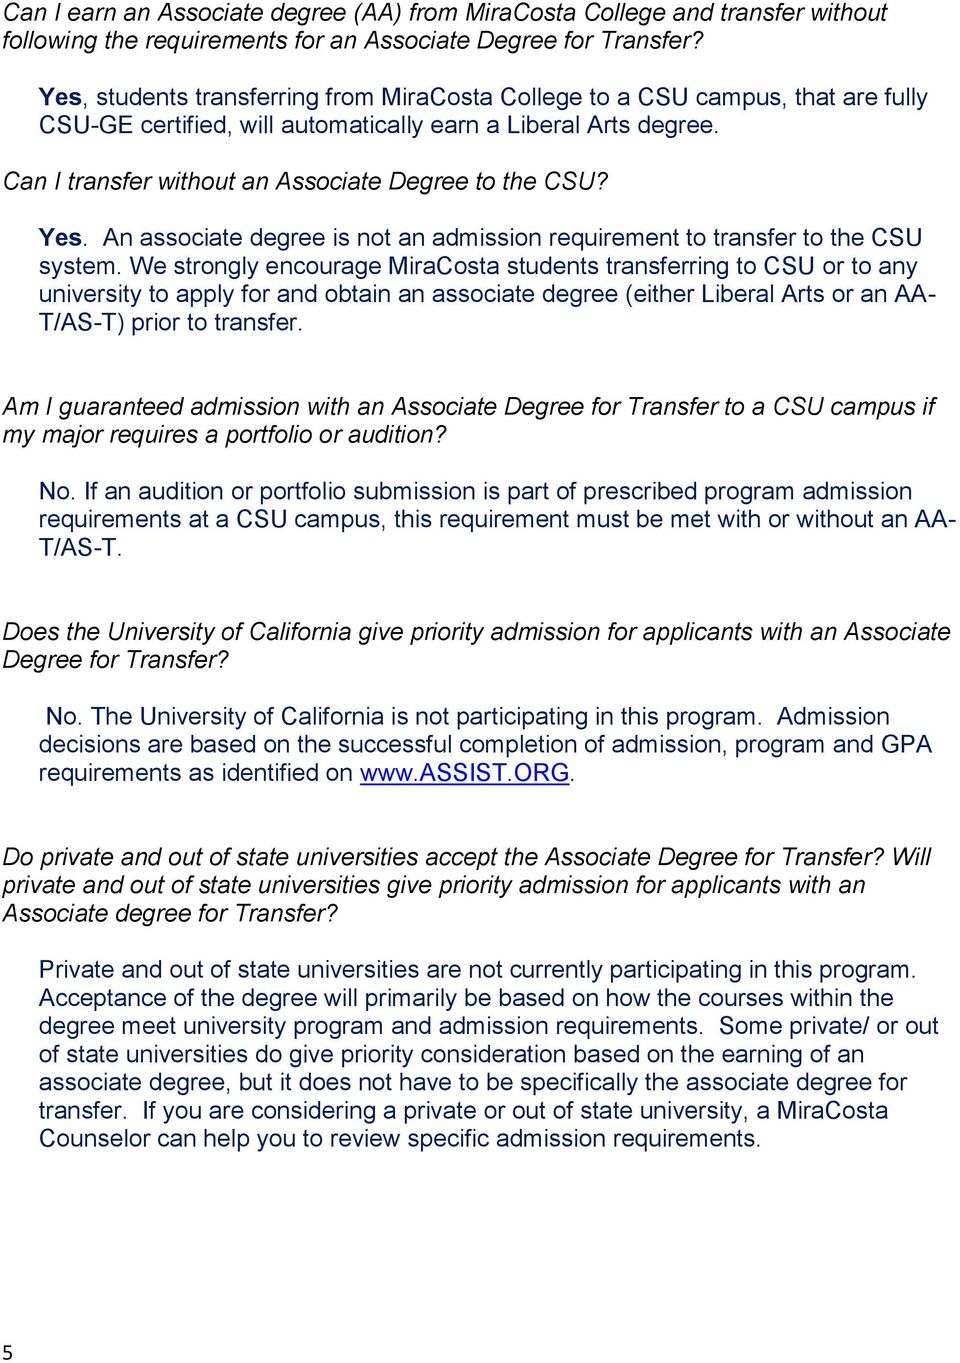 Can I transfer without an Associate Degree to the CSU? Yes. An associate degree is not an admission requirement to transfer to the CSU system.